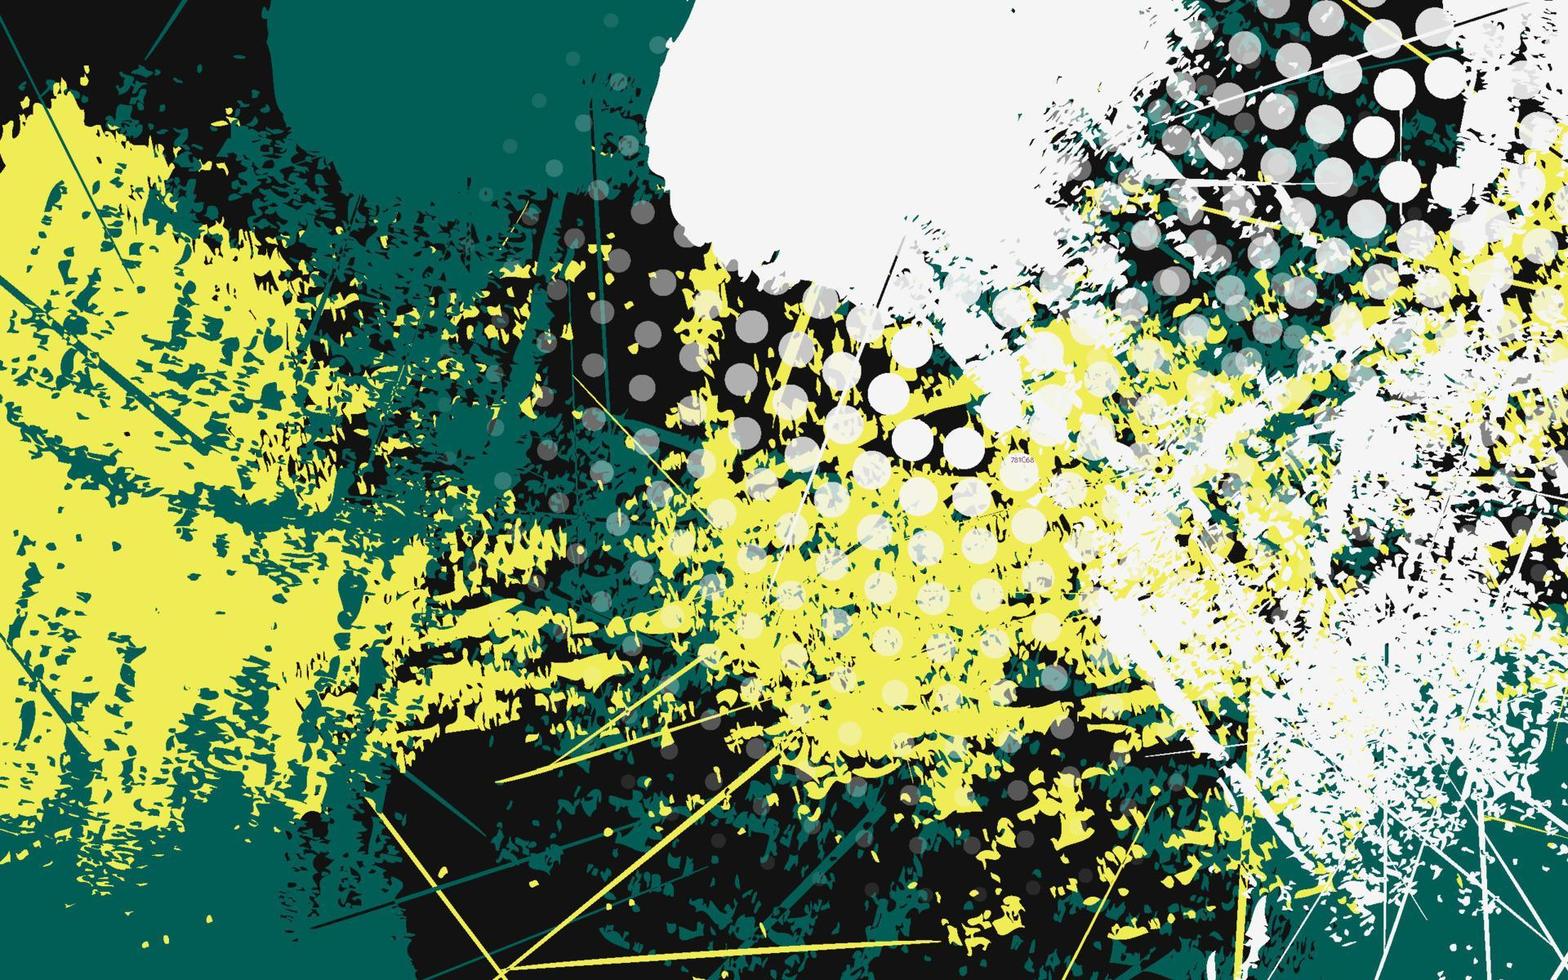 Abstract grunge texture green and yellow background vector